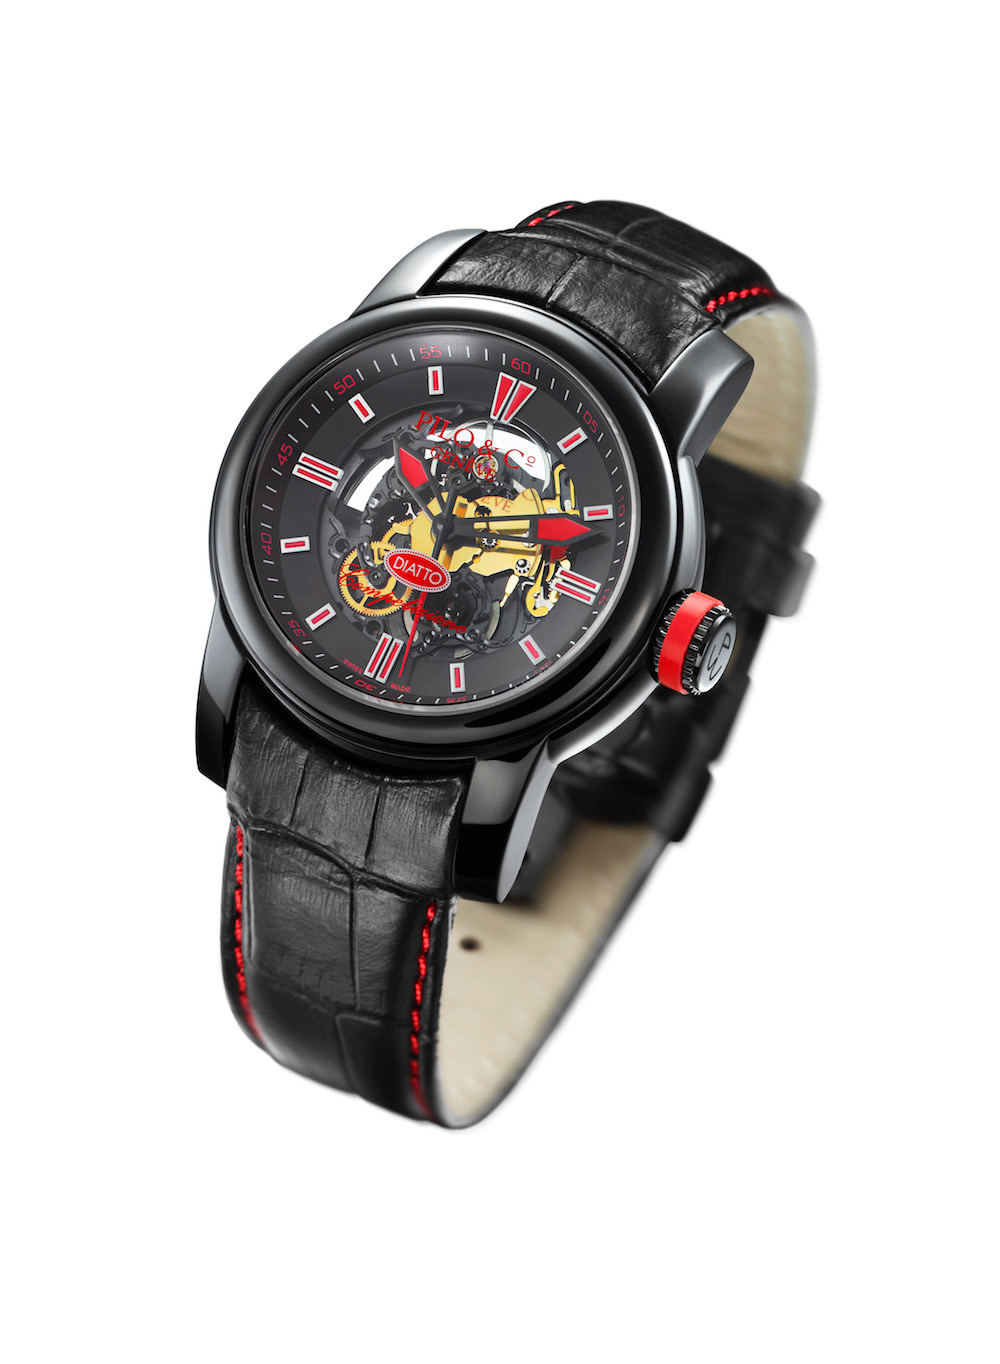 , Early Italian racing cars provide inspiration for Diatto Competizione watch, ClassicCars.com Journal